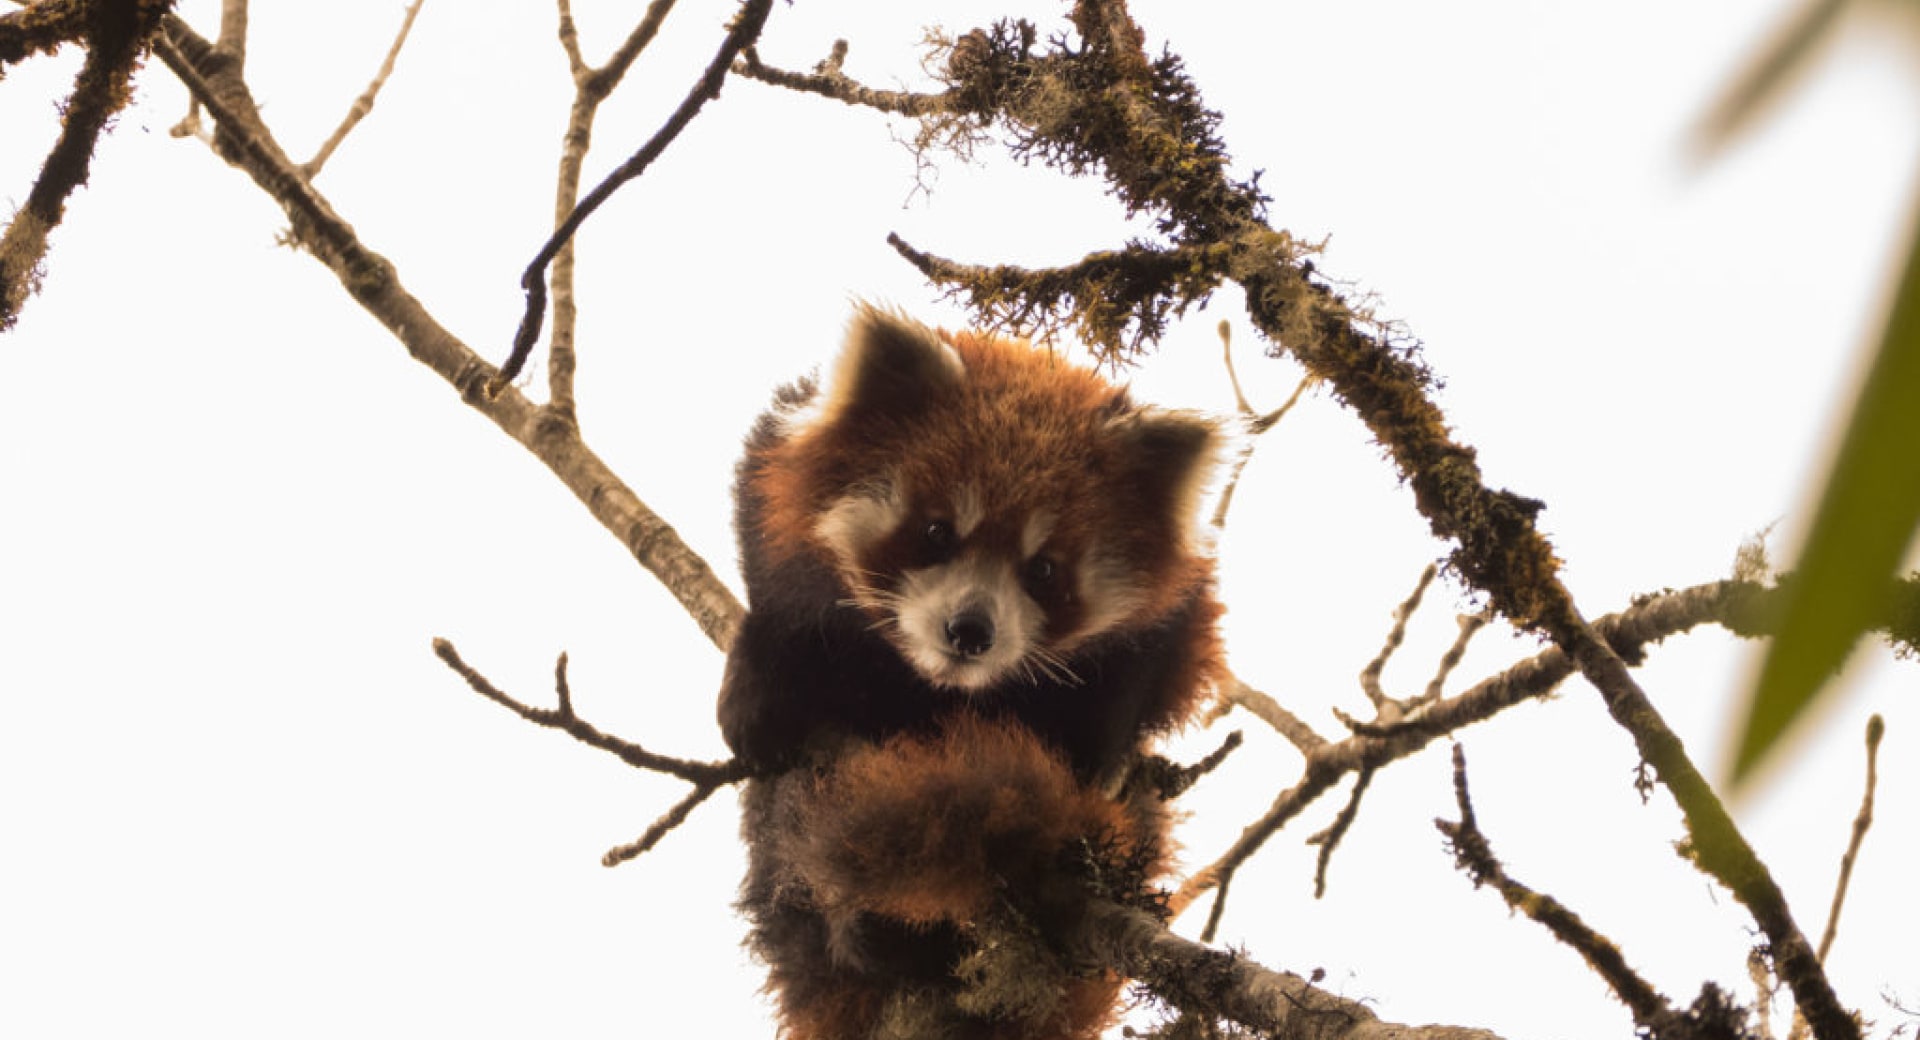 Coronavirus (COVID-19) Pandemic Highlights Need to Stop Illegal Trade of Red Pandas and Other Wildlife